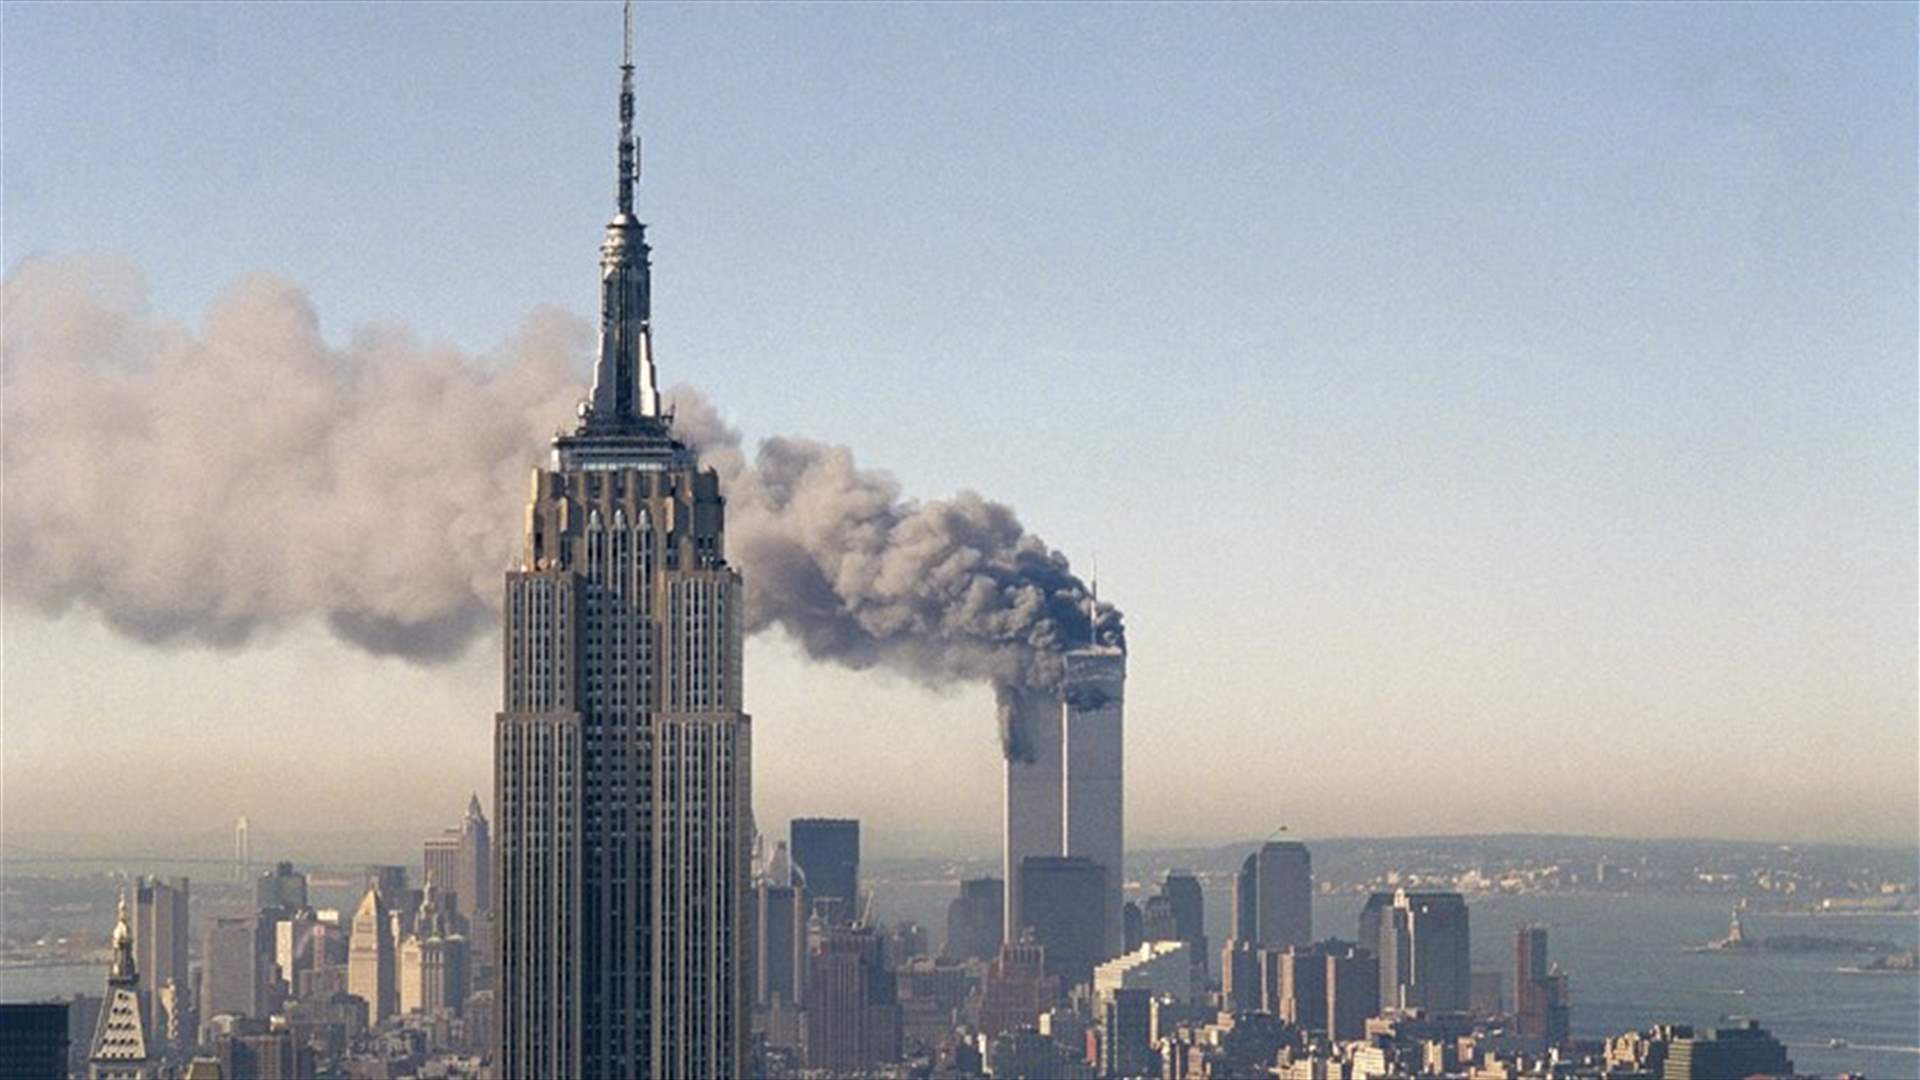 Saudi foreign ministry condemns passage of U.S. Sept. 11 law   